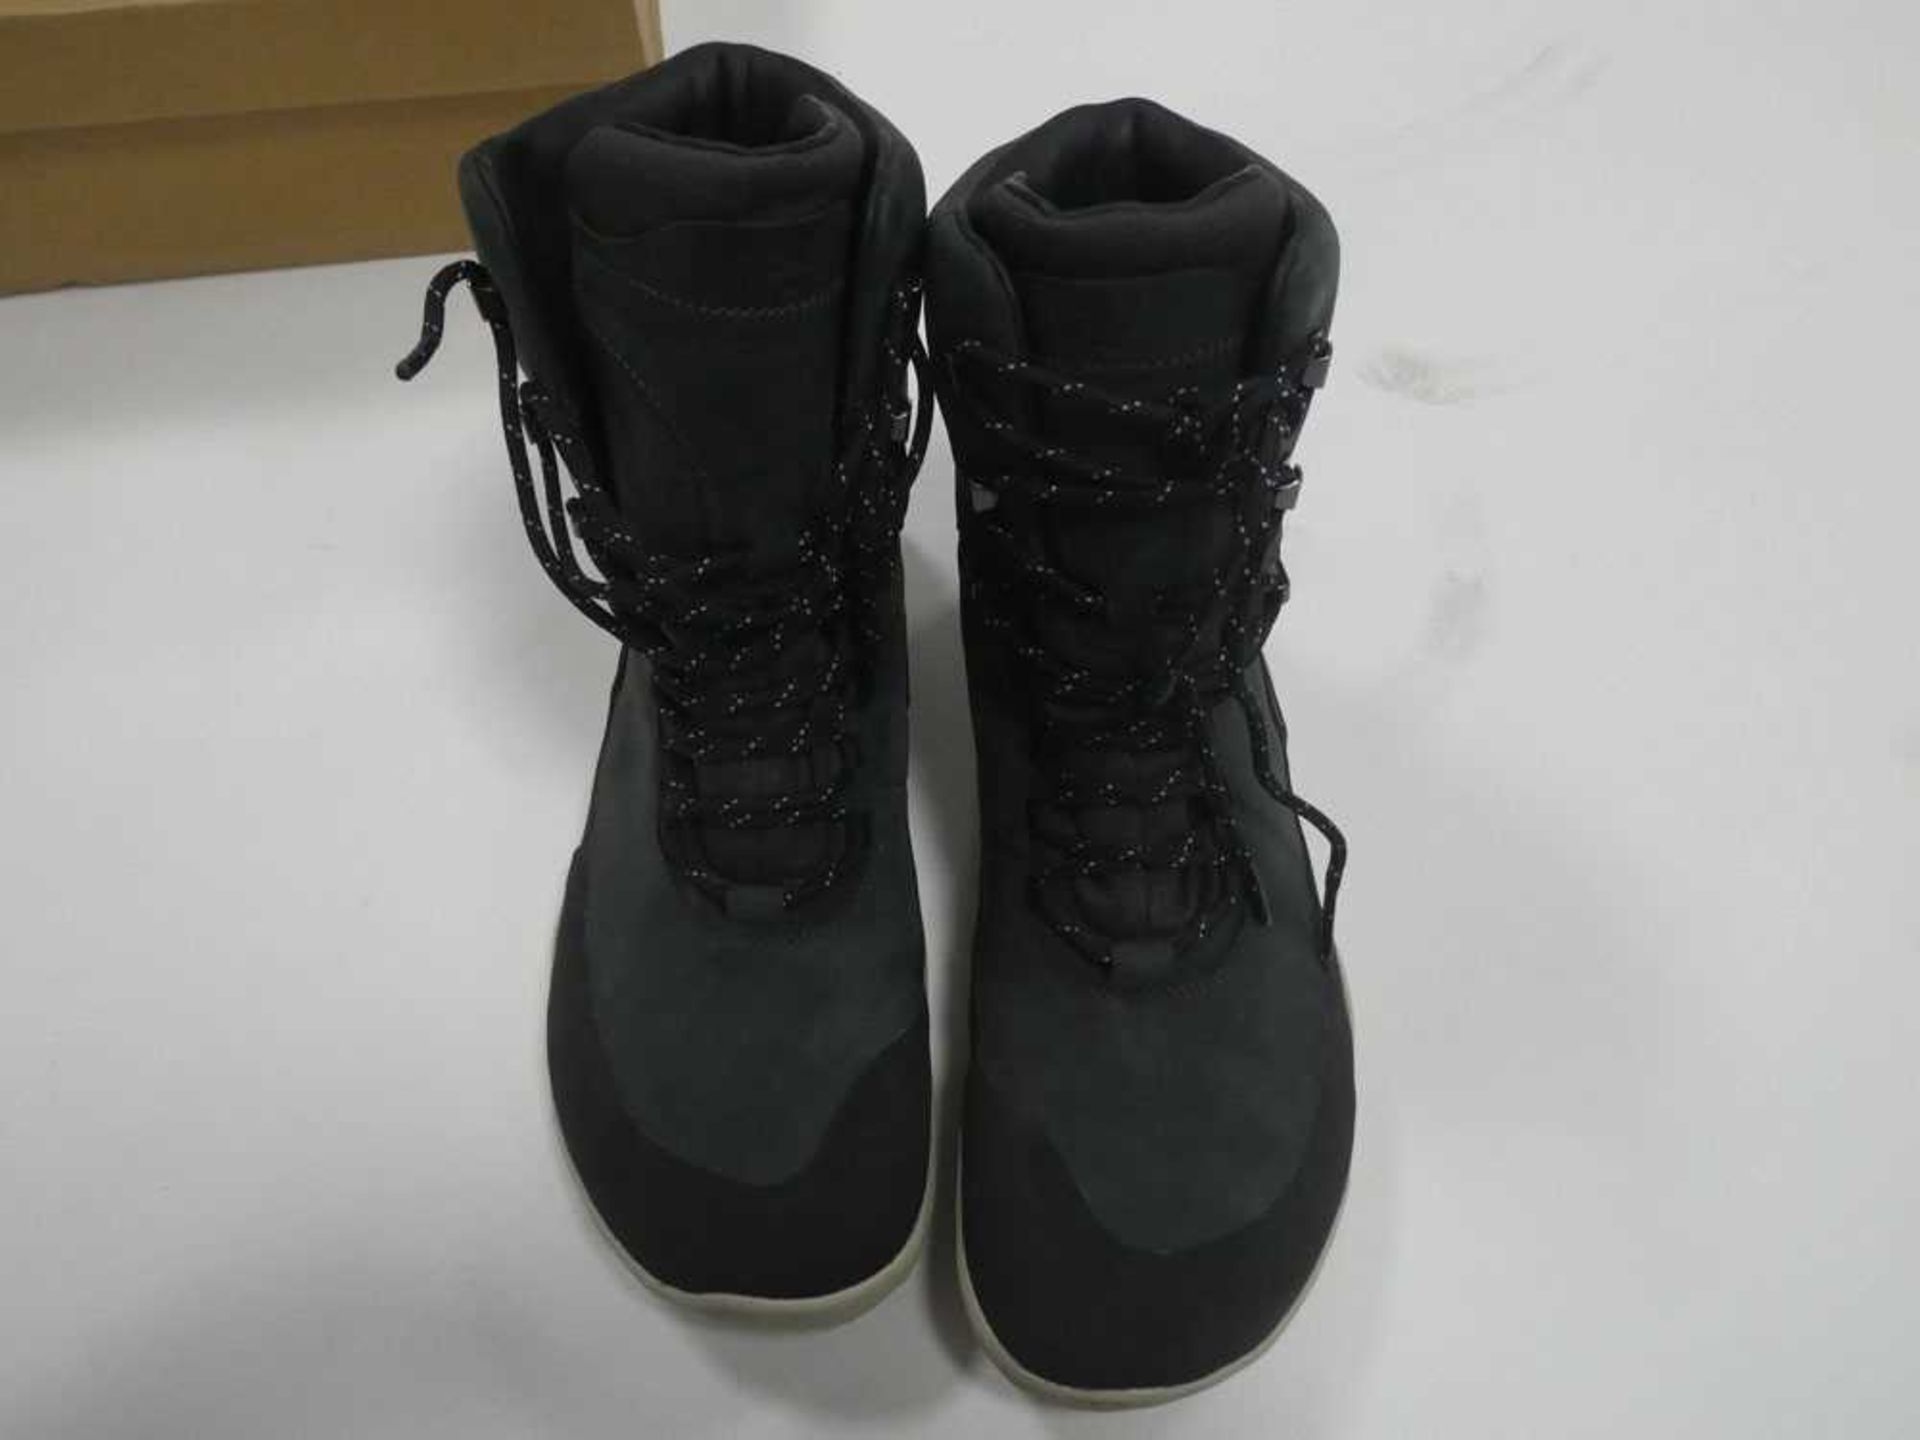 +VAT Boxed pair of Vivobarefoot tracker hi II FG ladies boots in obsidian size EU 40 - Image 2 of 3